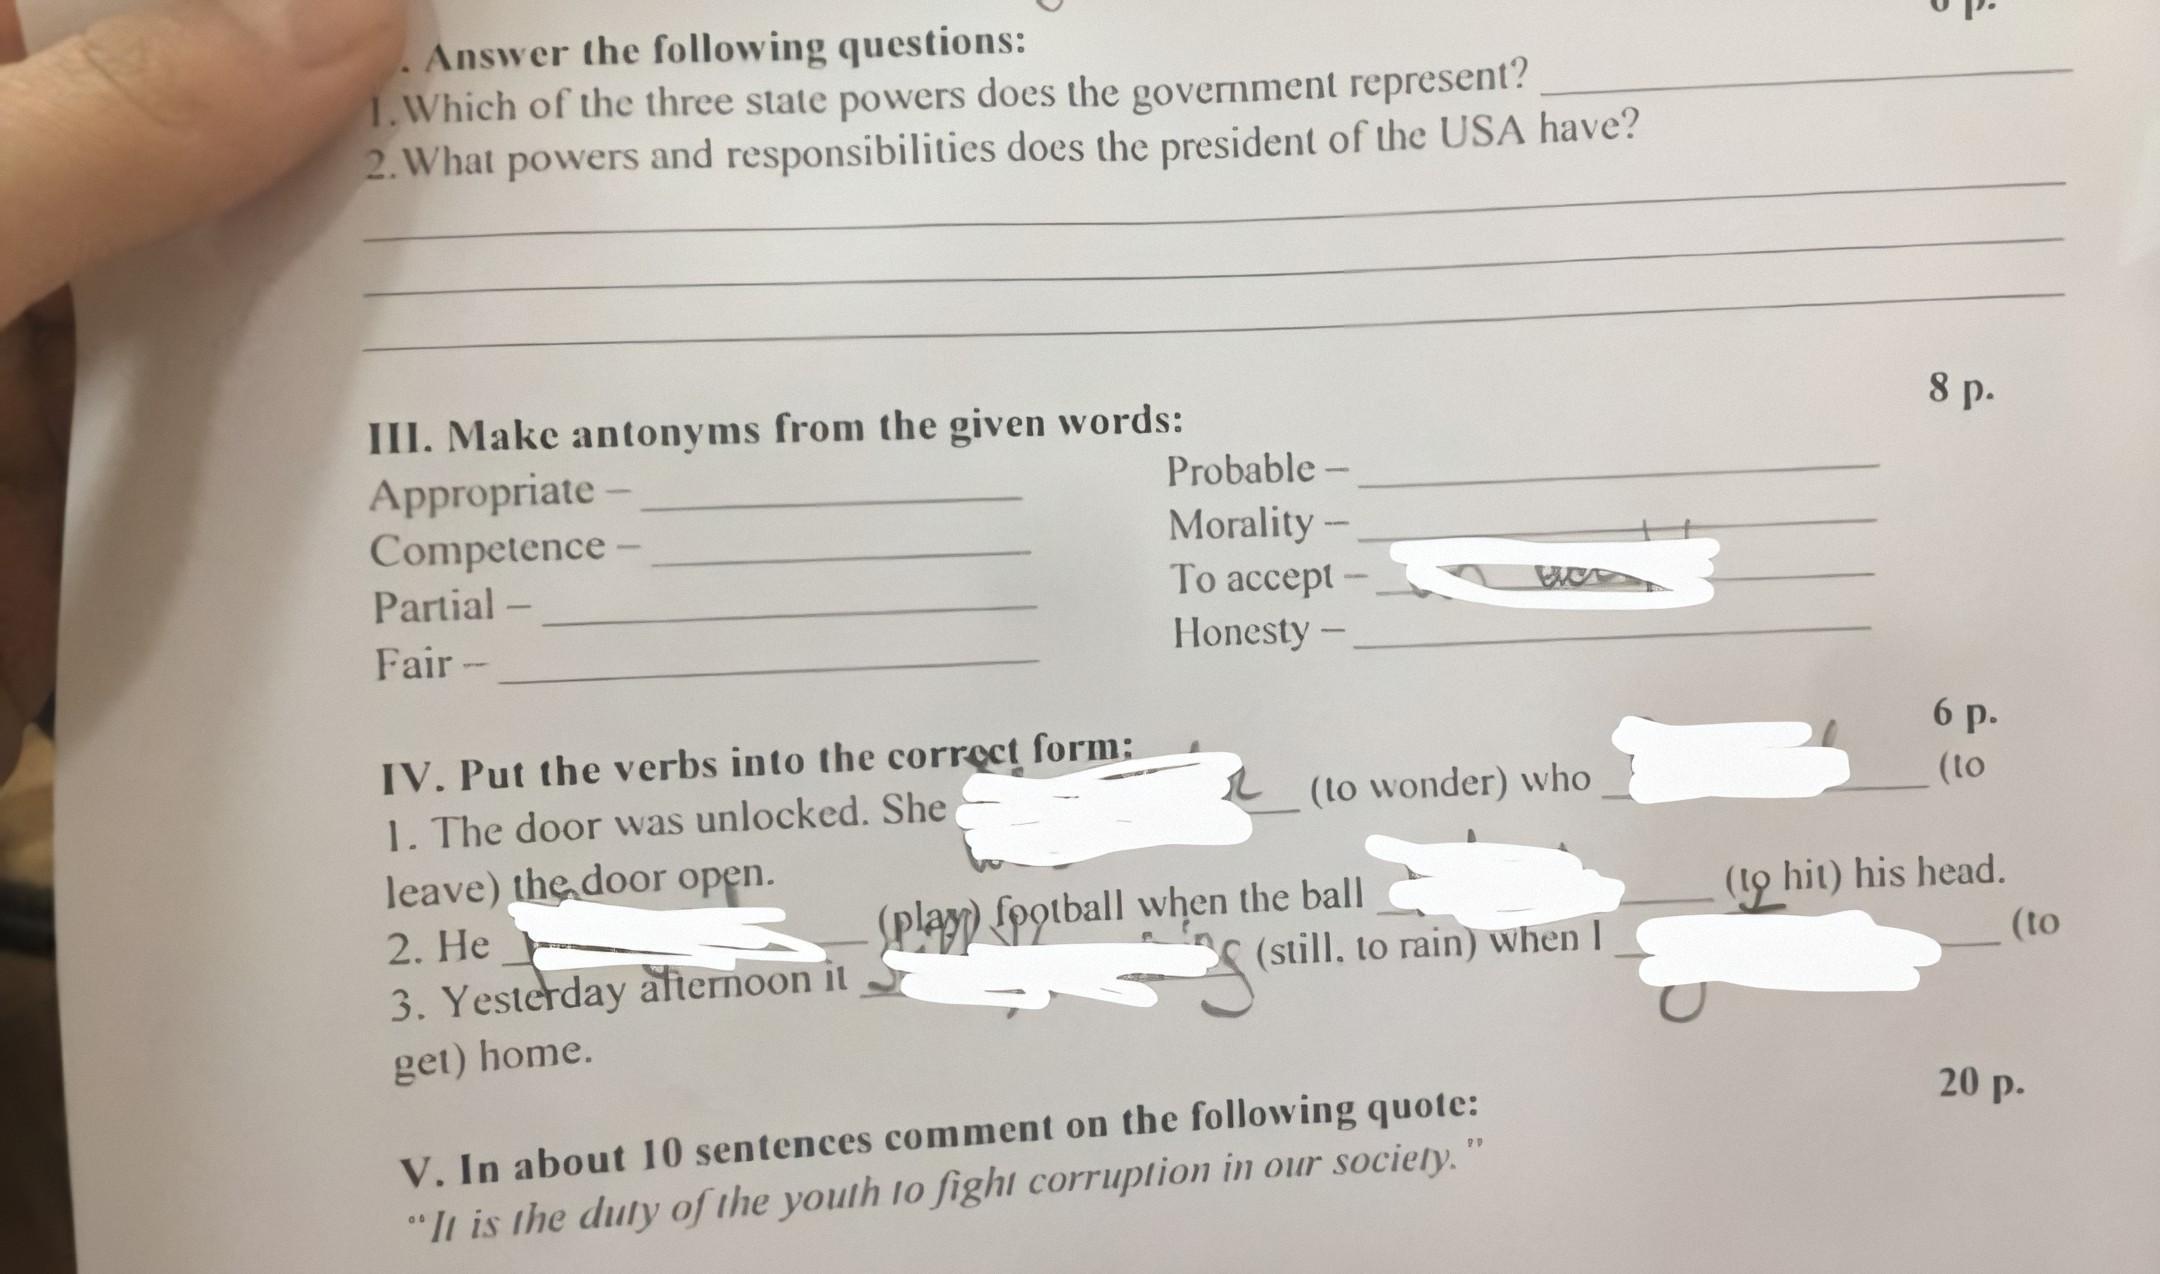 Write questions using these words